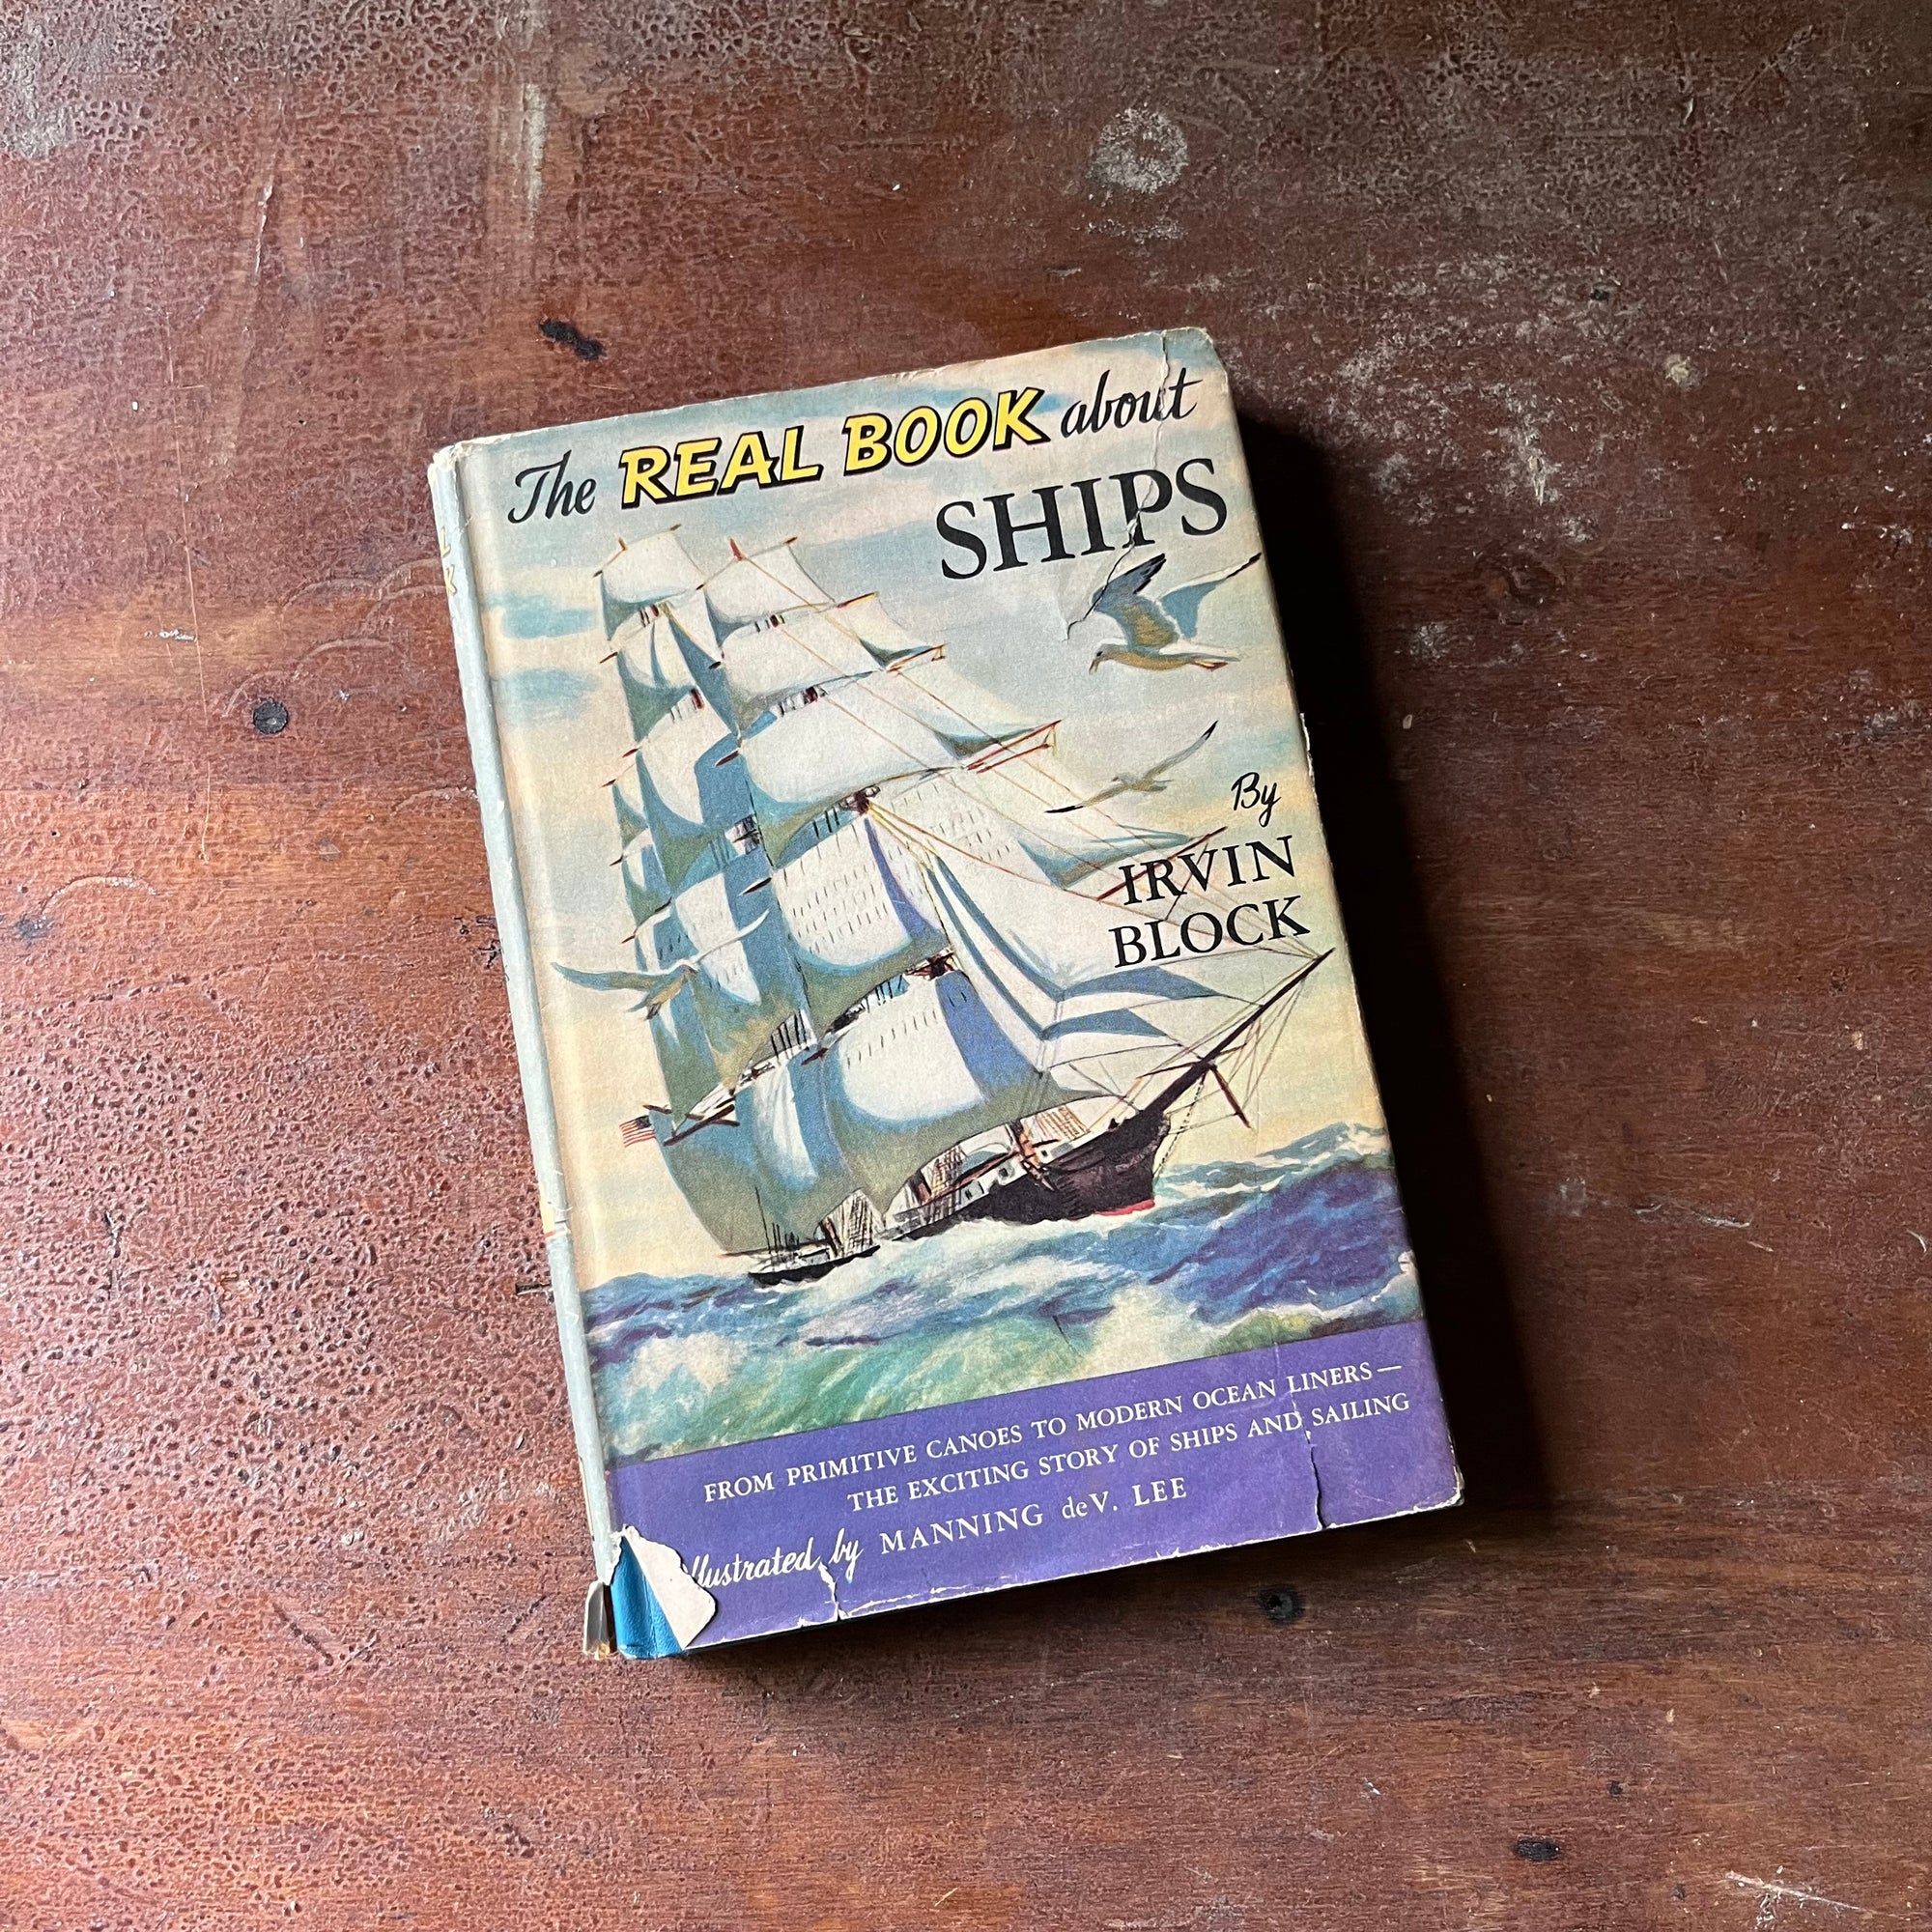 vintage children's book, children's history book, vintage chapter book, The Real Book About Series - The Real Book About Ships by Irvin Block with illustrations by Manning de V. Lee - view of the dust jacket's front cover with an illustration of an old sailing ship